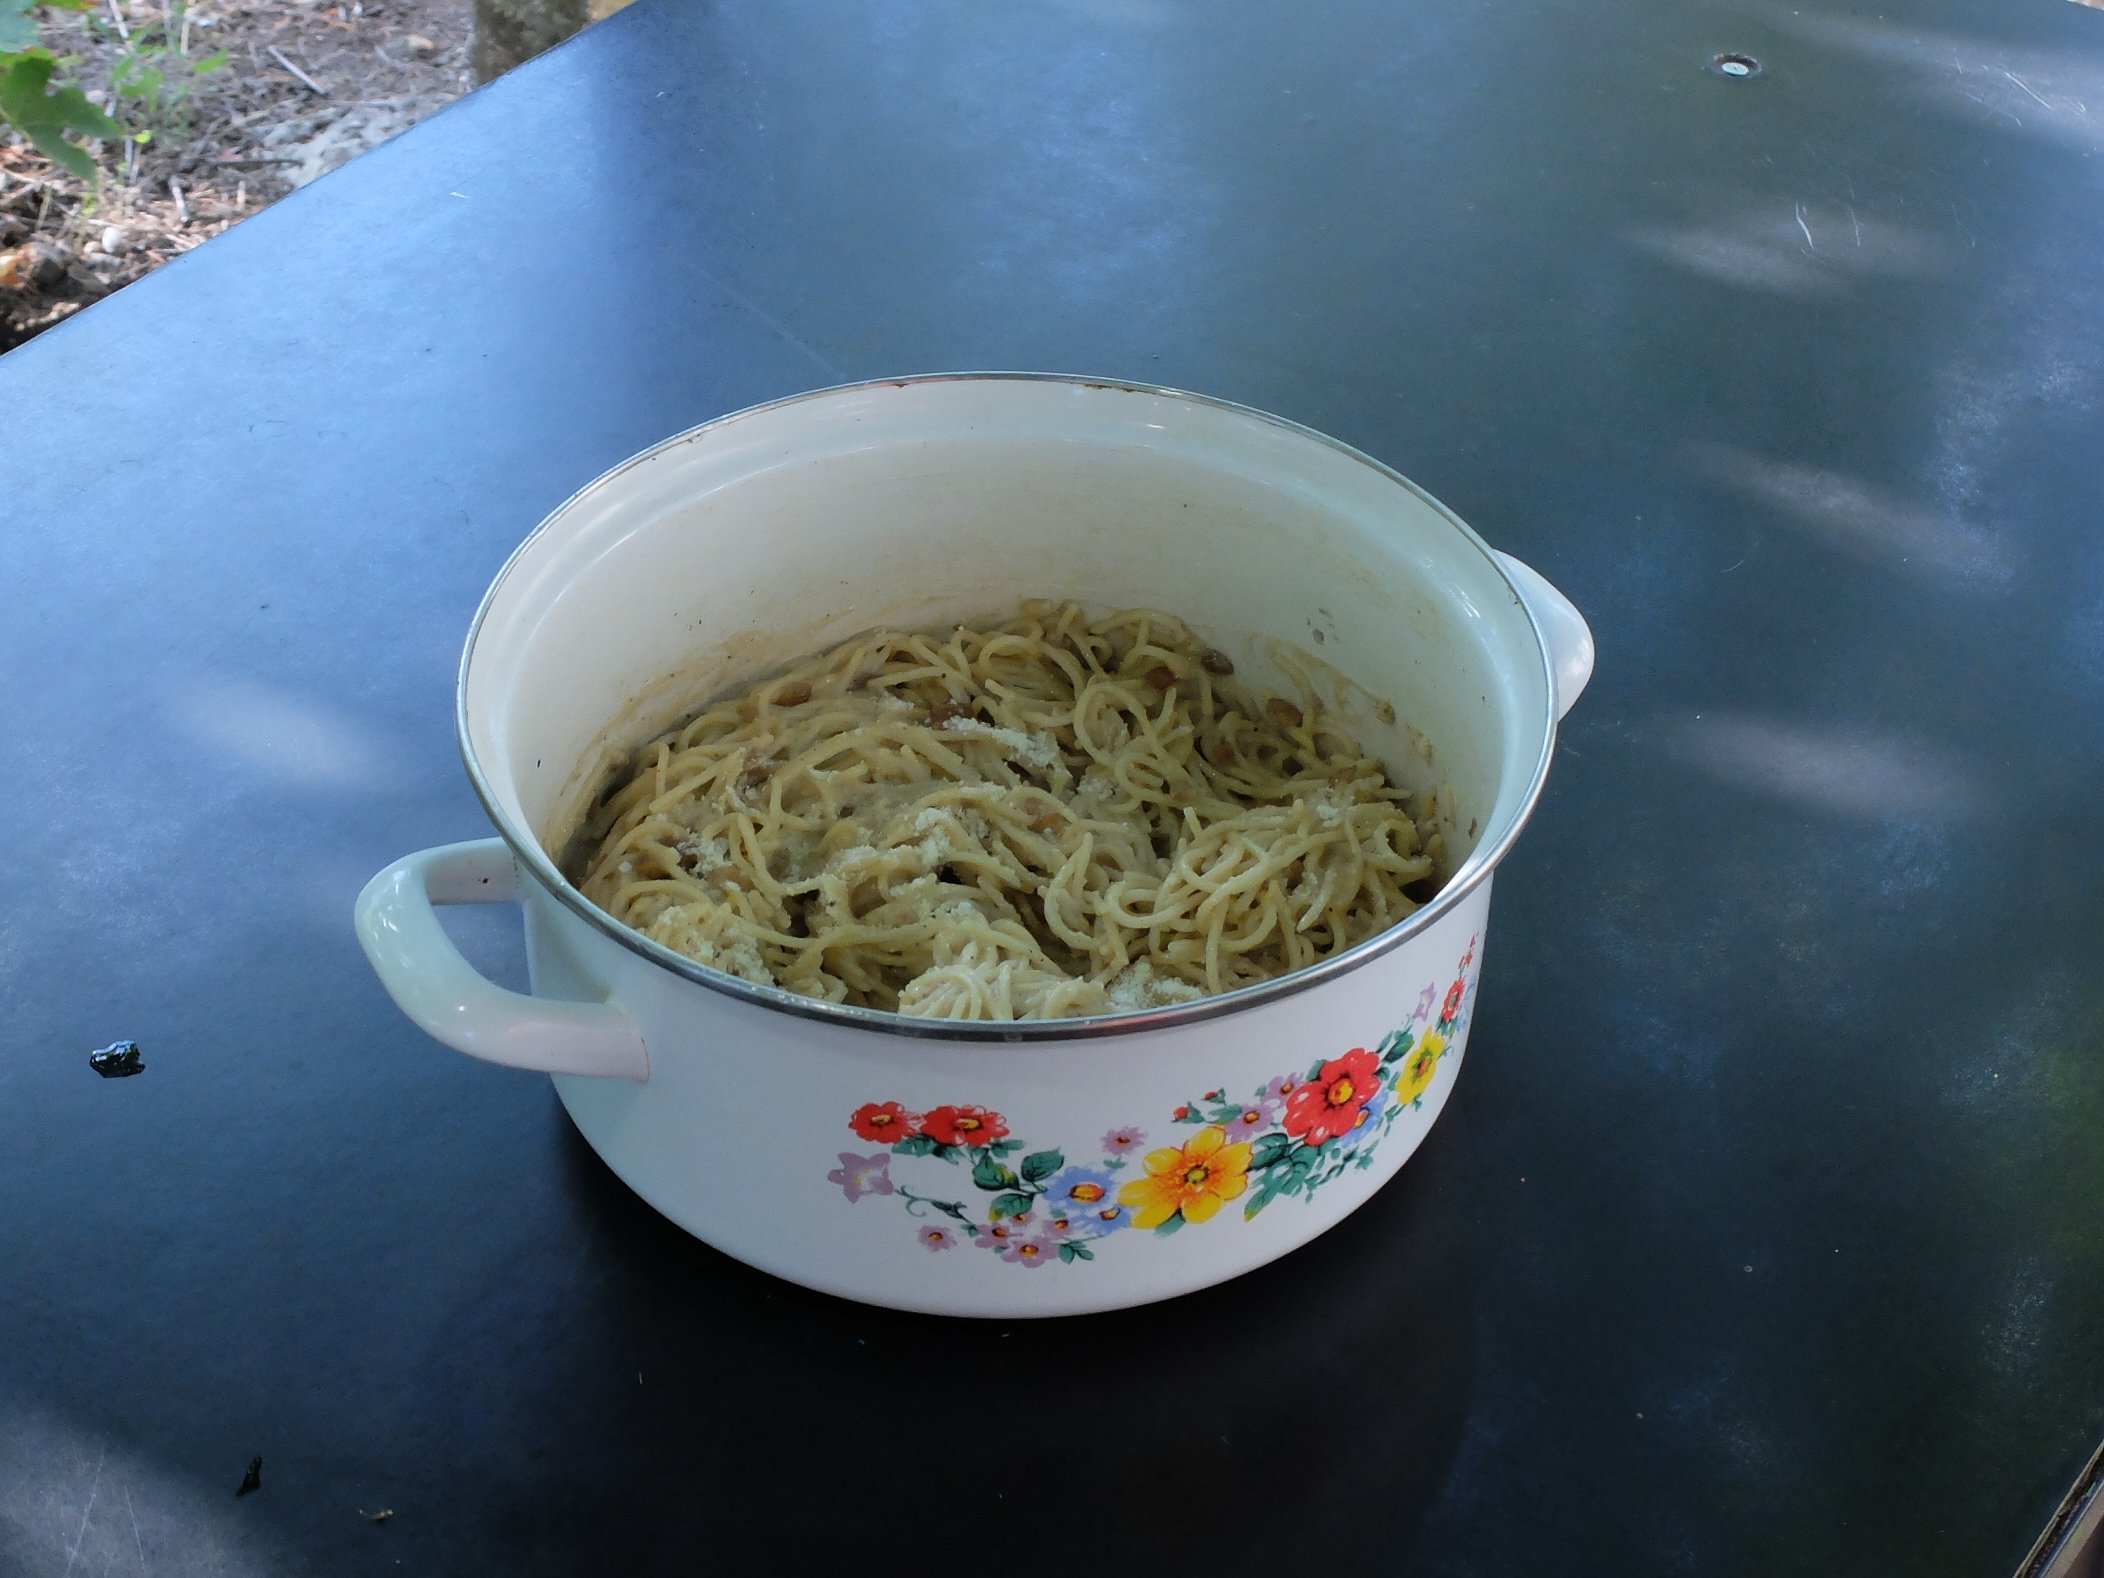   Niklas Heiss, Recipe: Spaghetti with raisins, white metal pot with flowers from baba Vasa's kitchen, cooked by Laurenz  